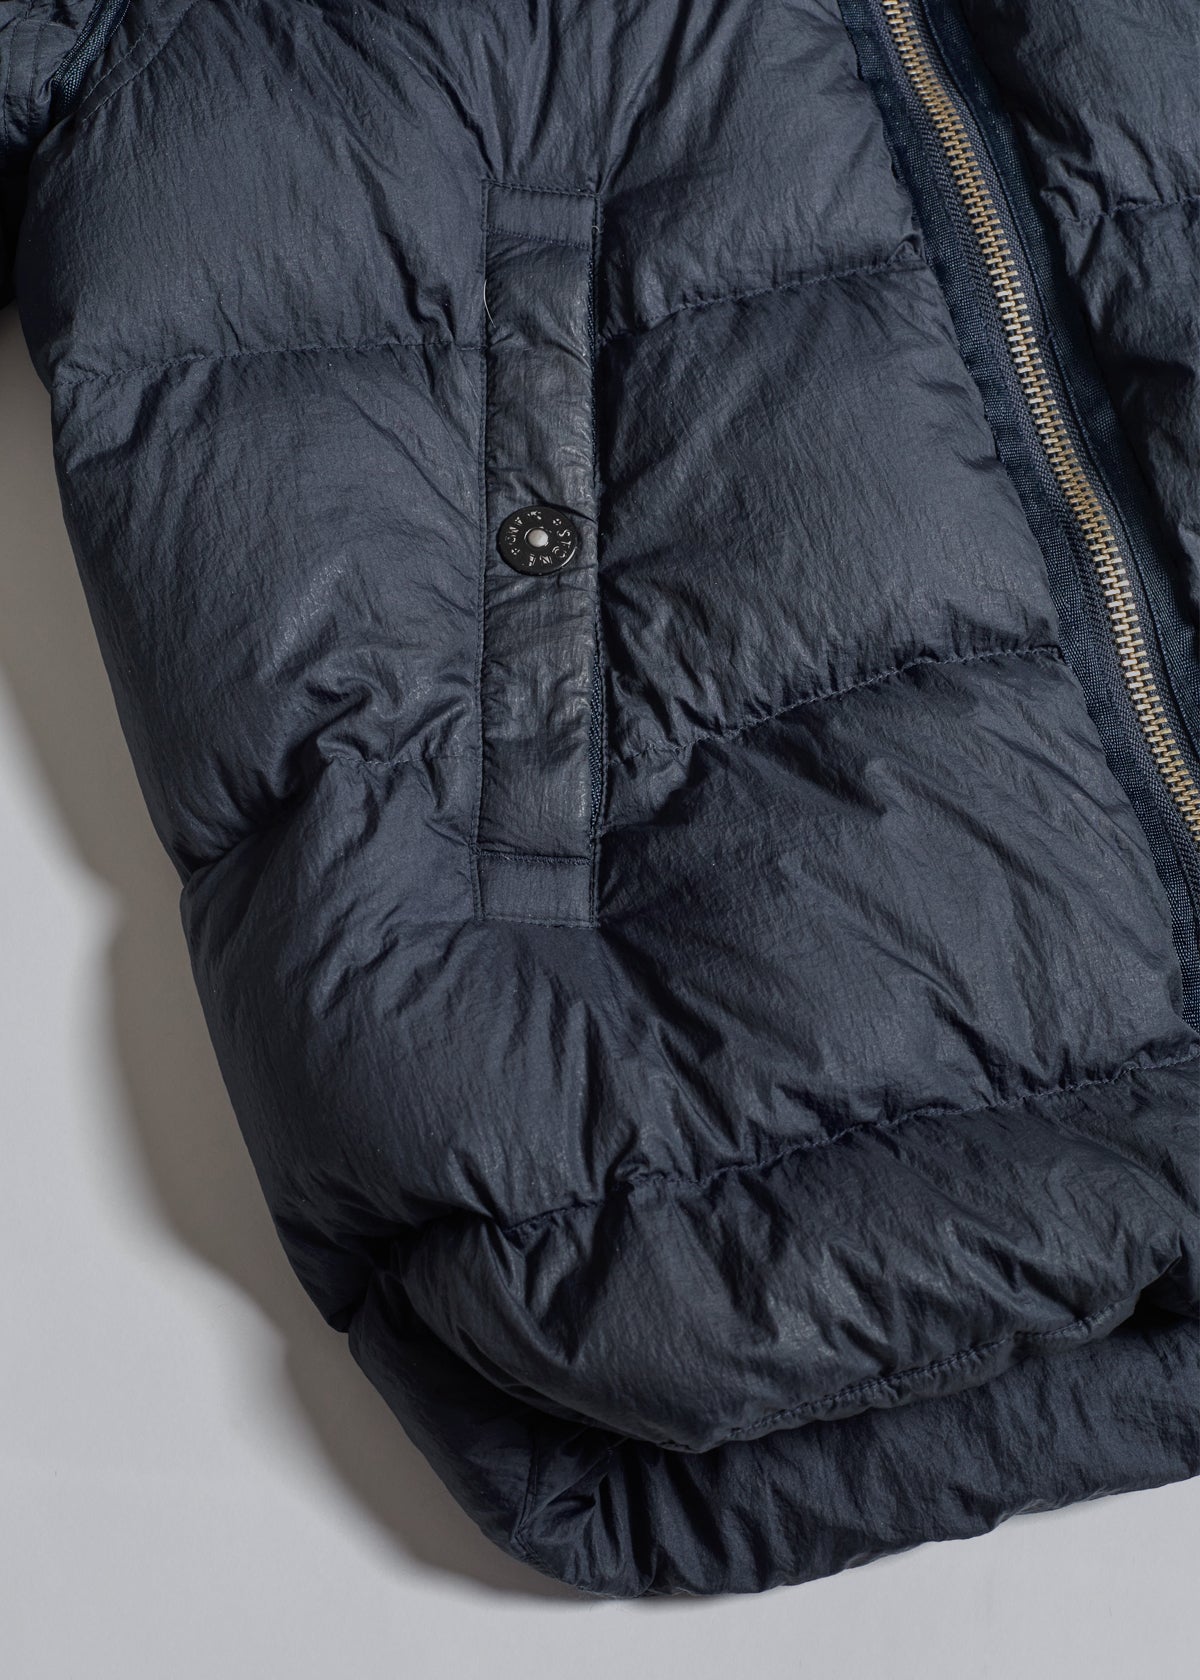 Navy Goose Down Jacket 2010's - Large - The Archivist Store